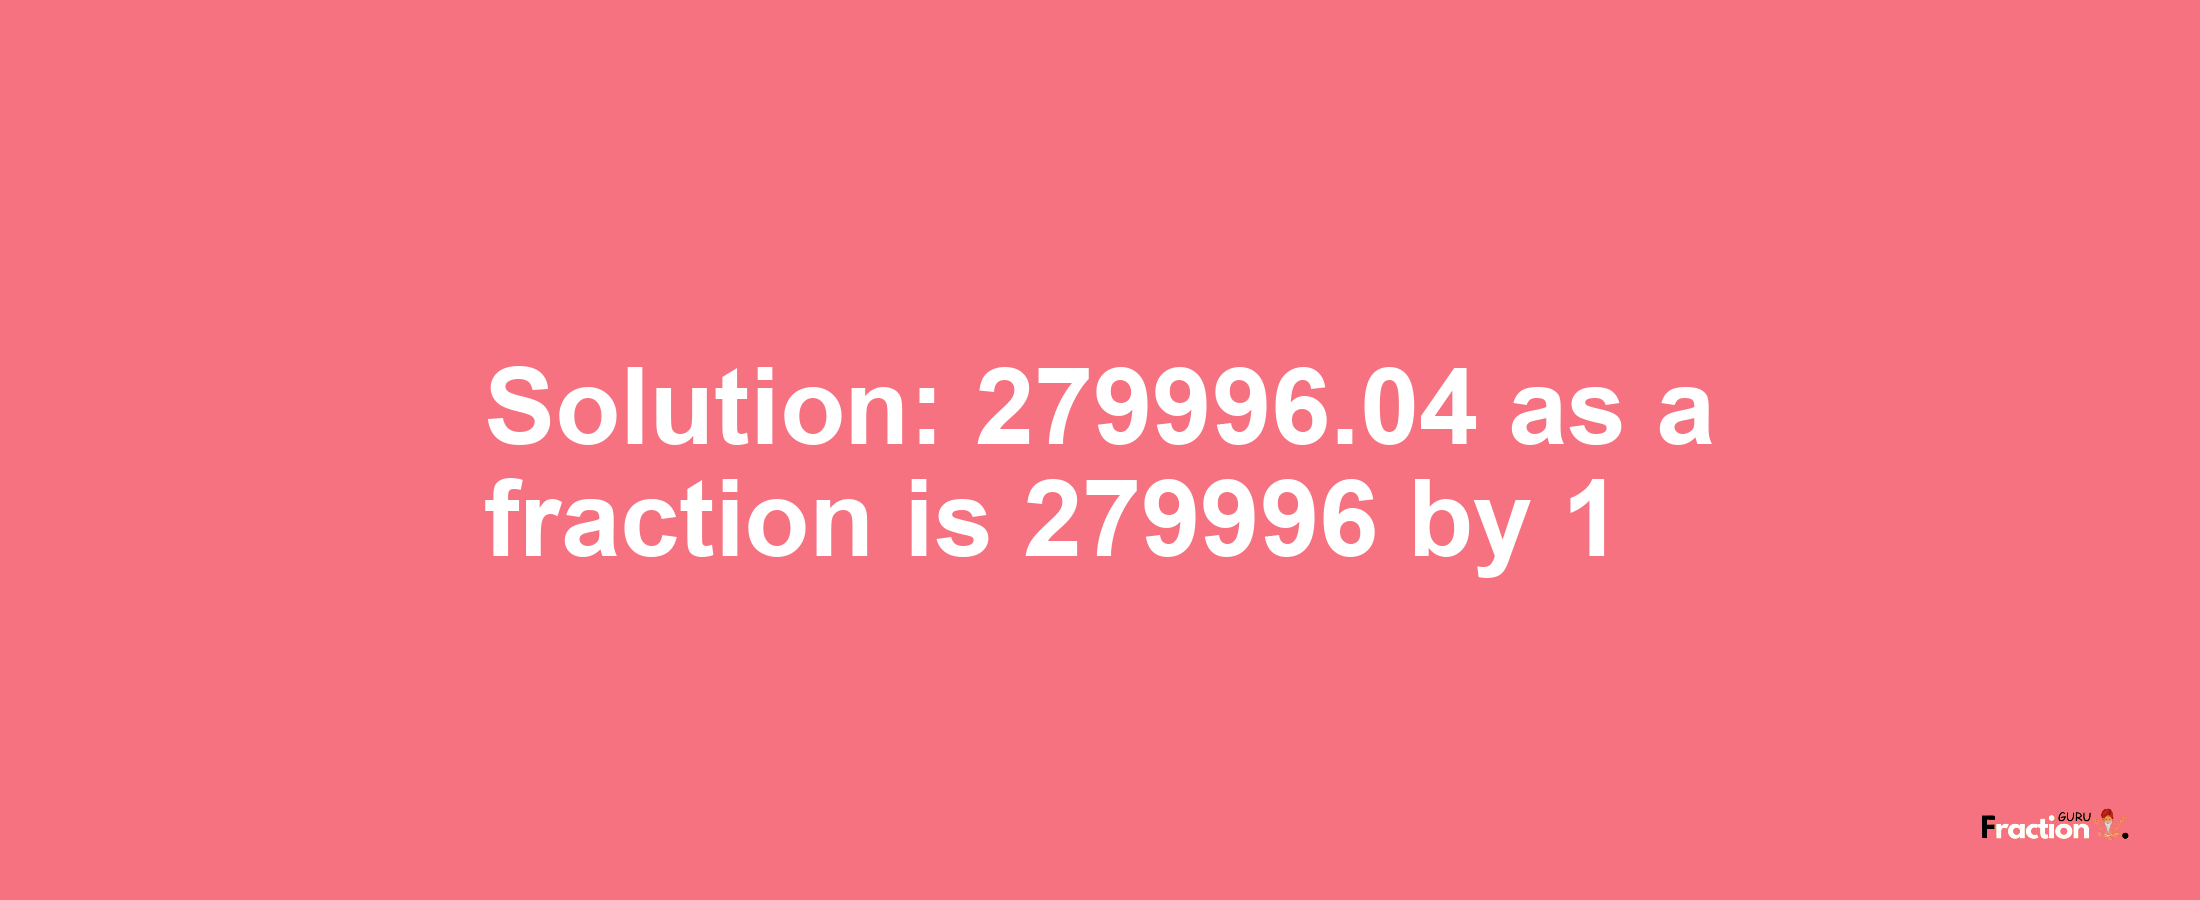 Solution:279996.04 as a fraction is 279996/1